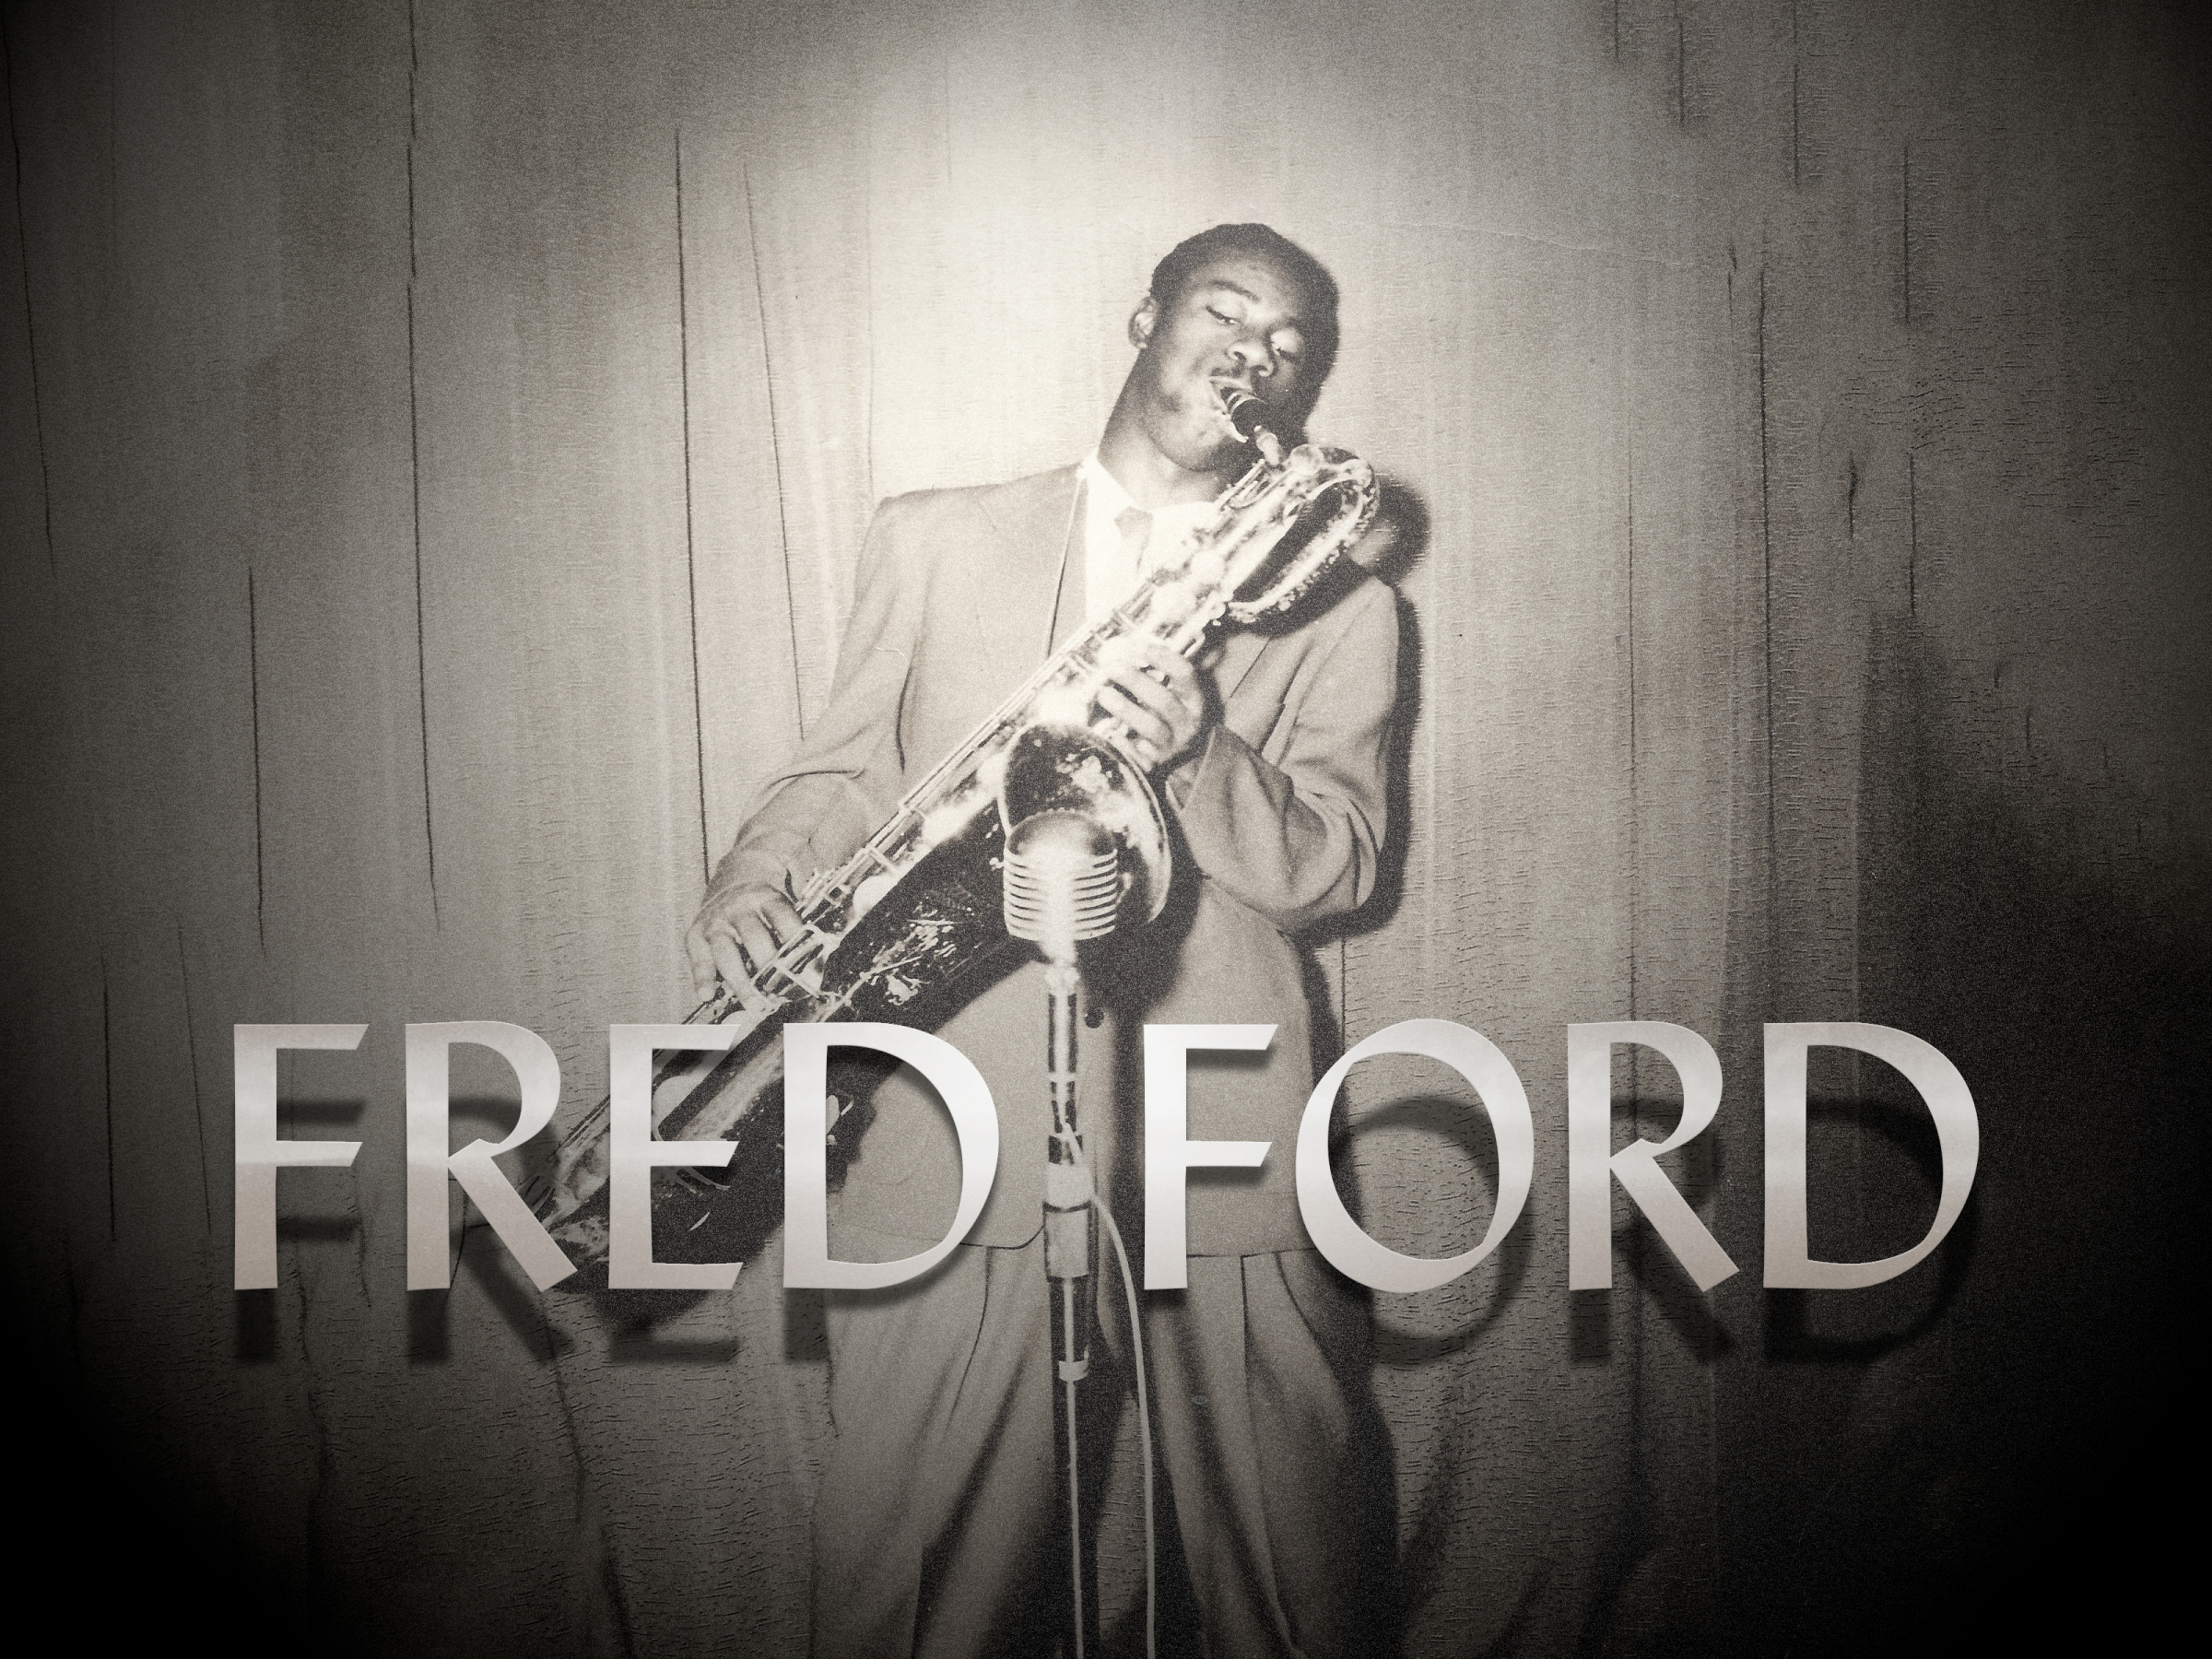 Fred Ford